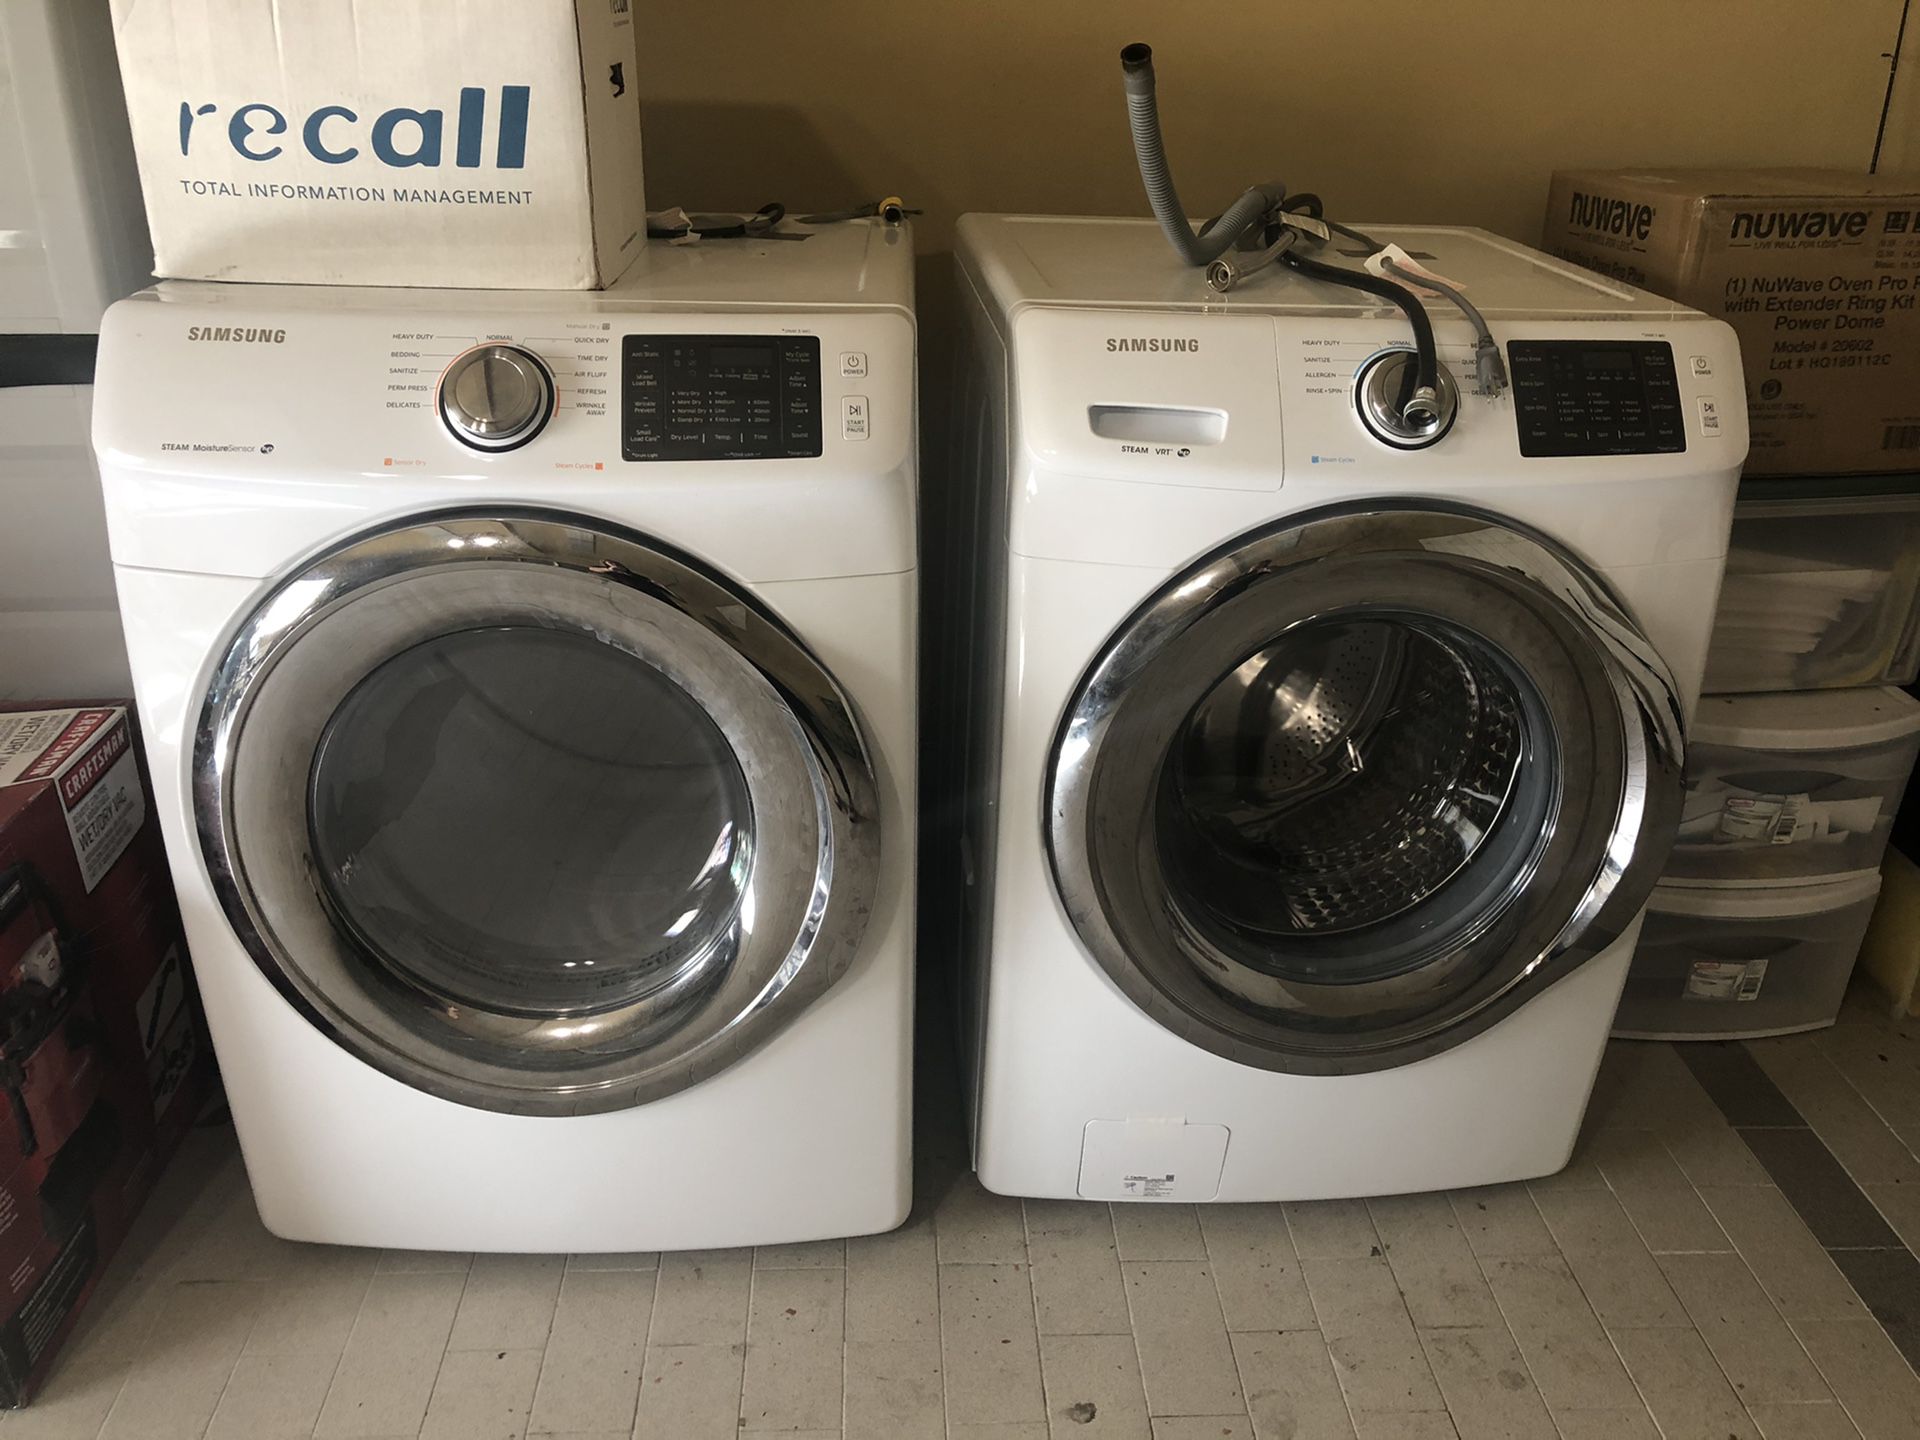 Samsung Front Load Washer and Dryer set